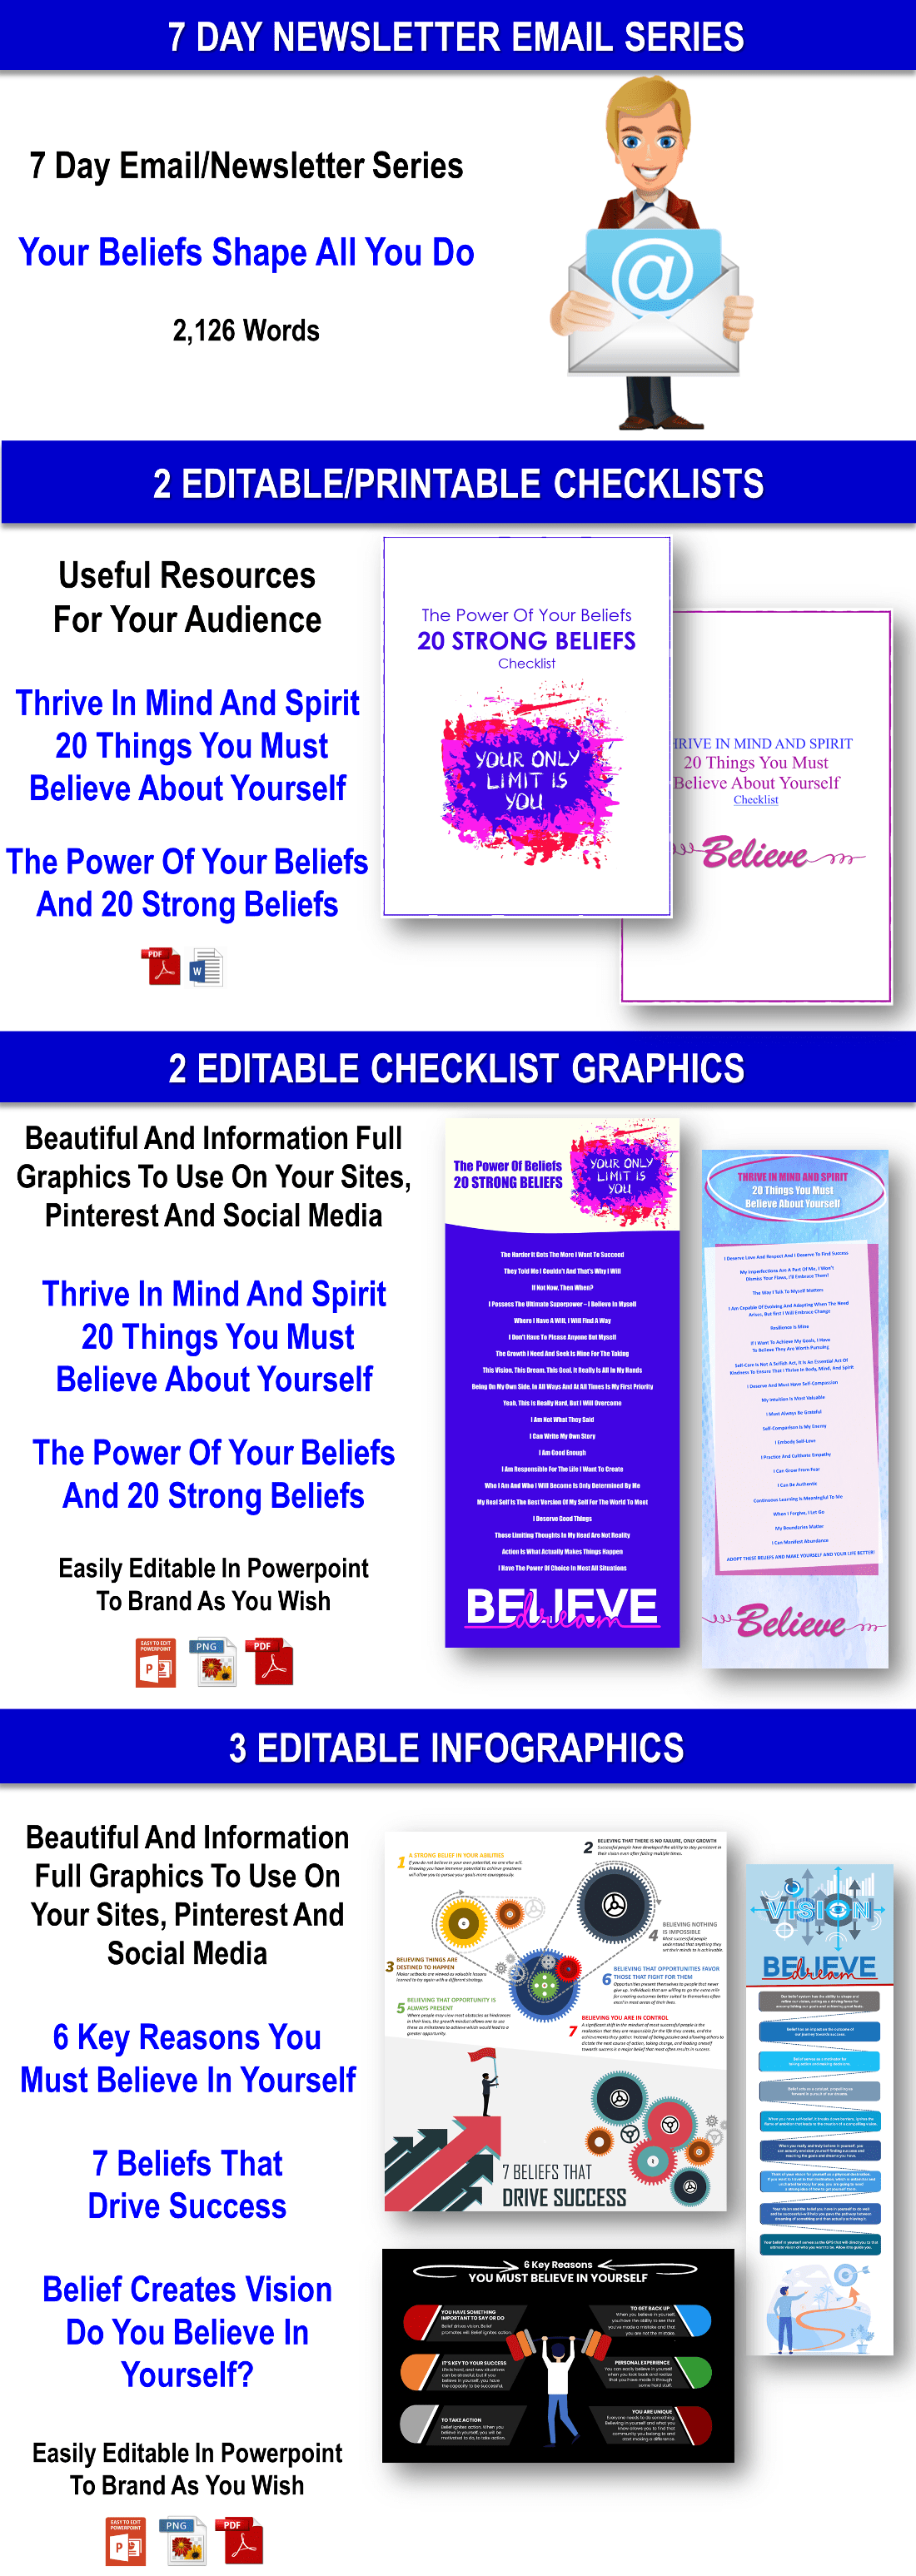 Be Unstoppable - The Power Of Your Beliefs And 20 Strong Beliefs Content Pack - PLR Rights